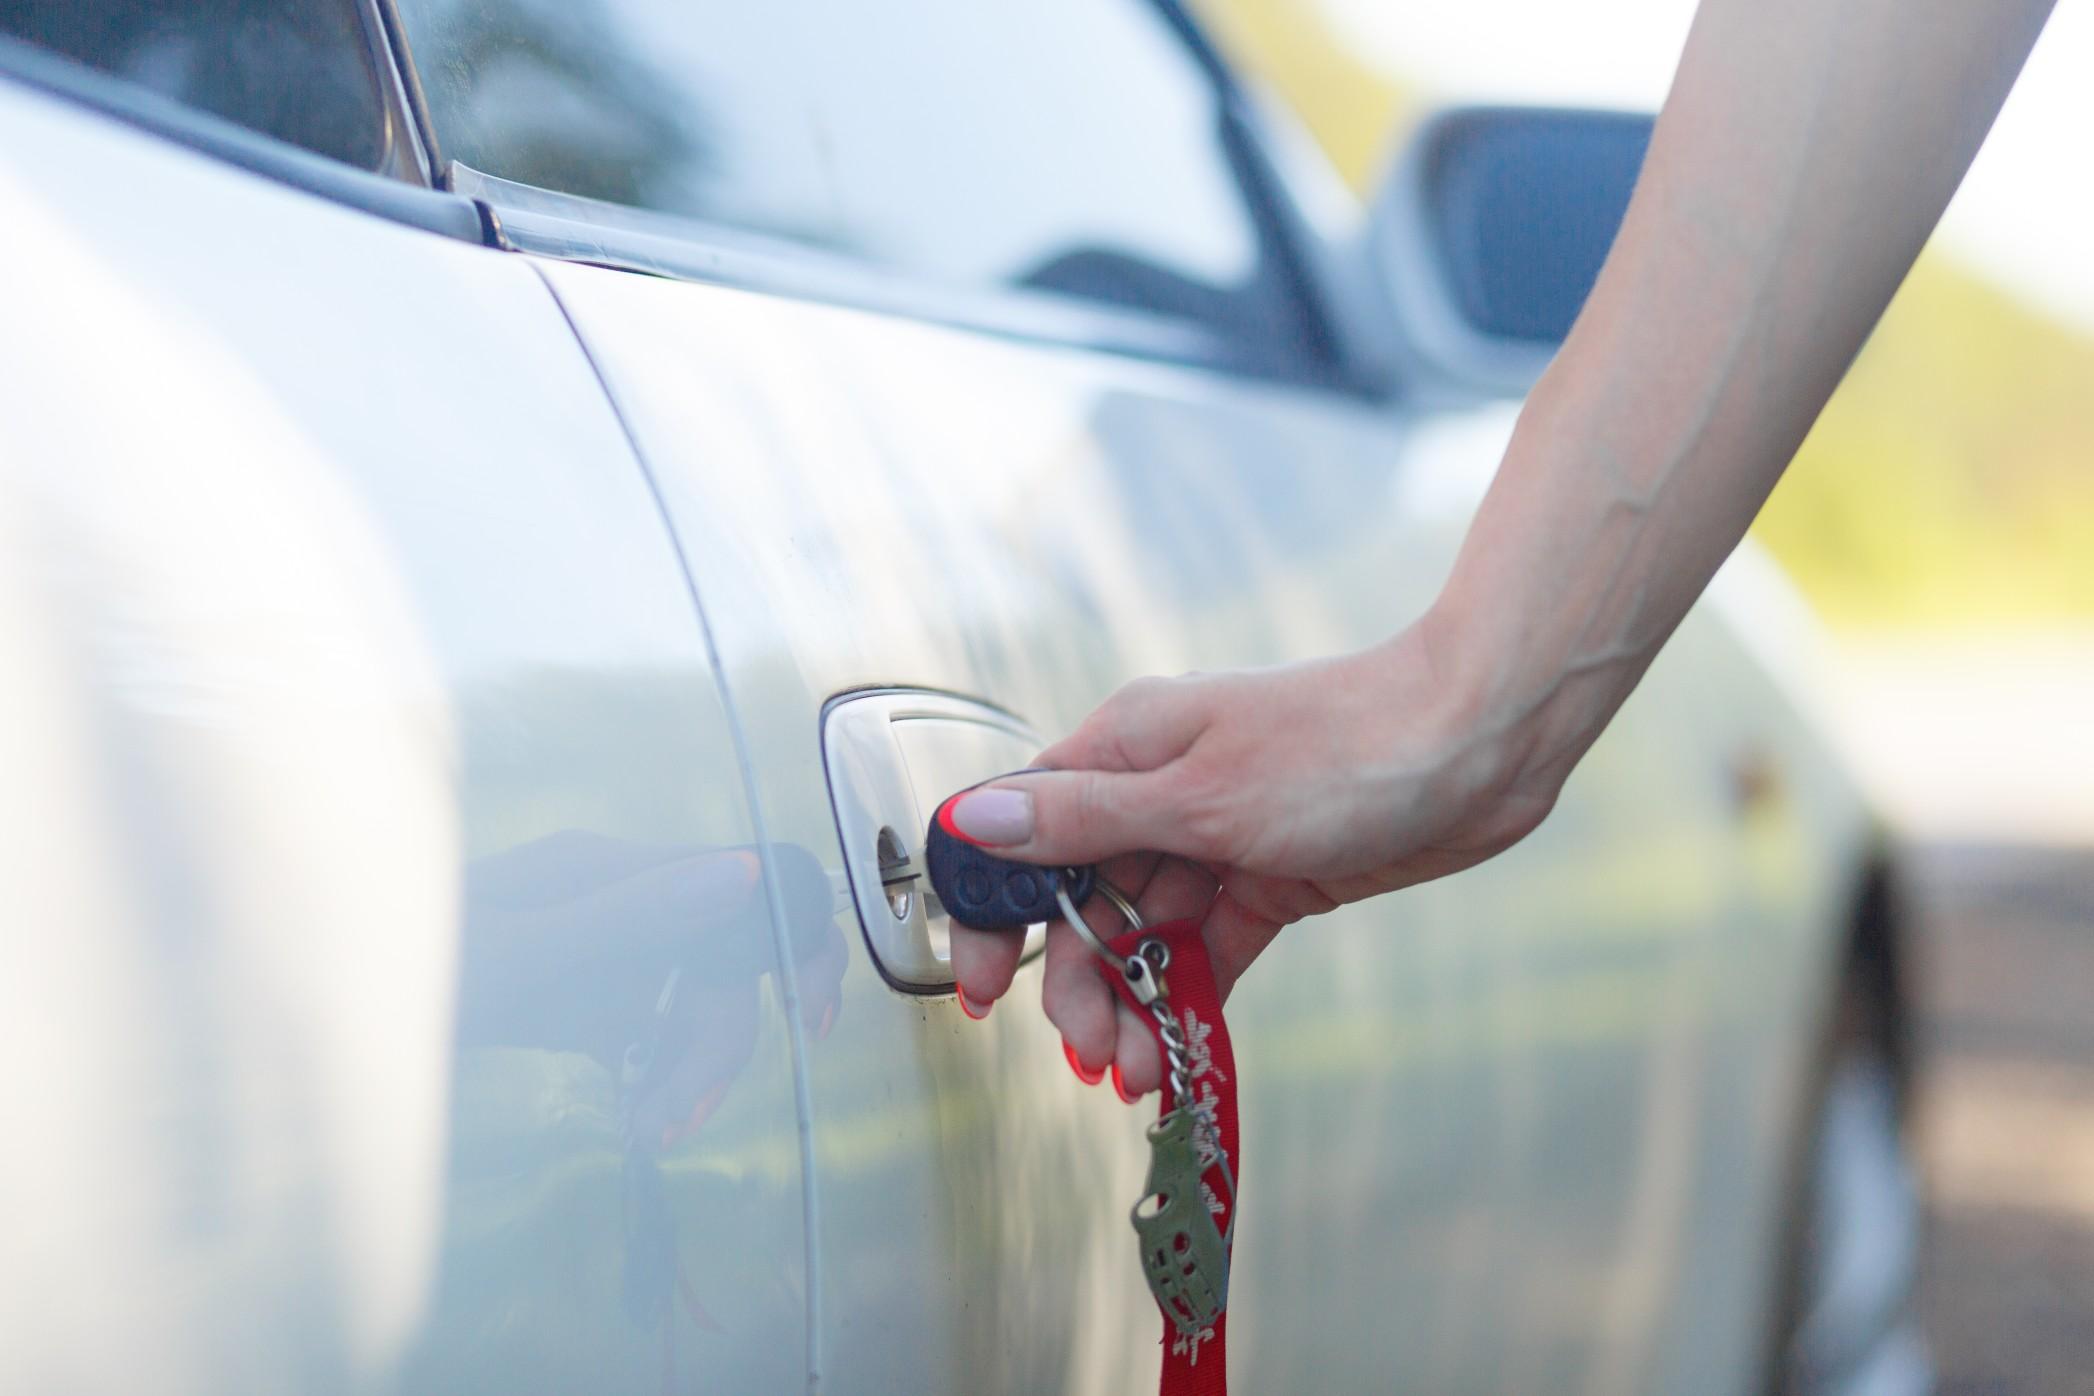 With an increase in stolen cars in Connecticut last year, it’s important to always lock your car.